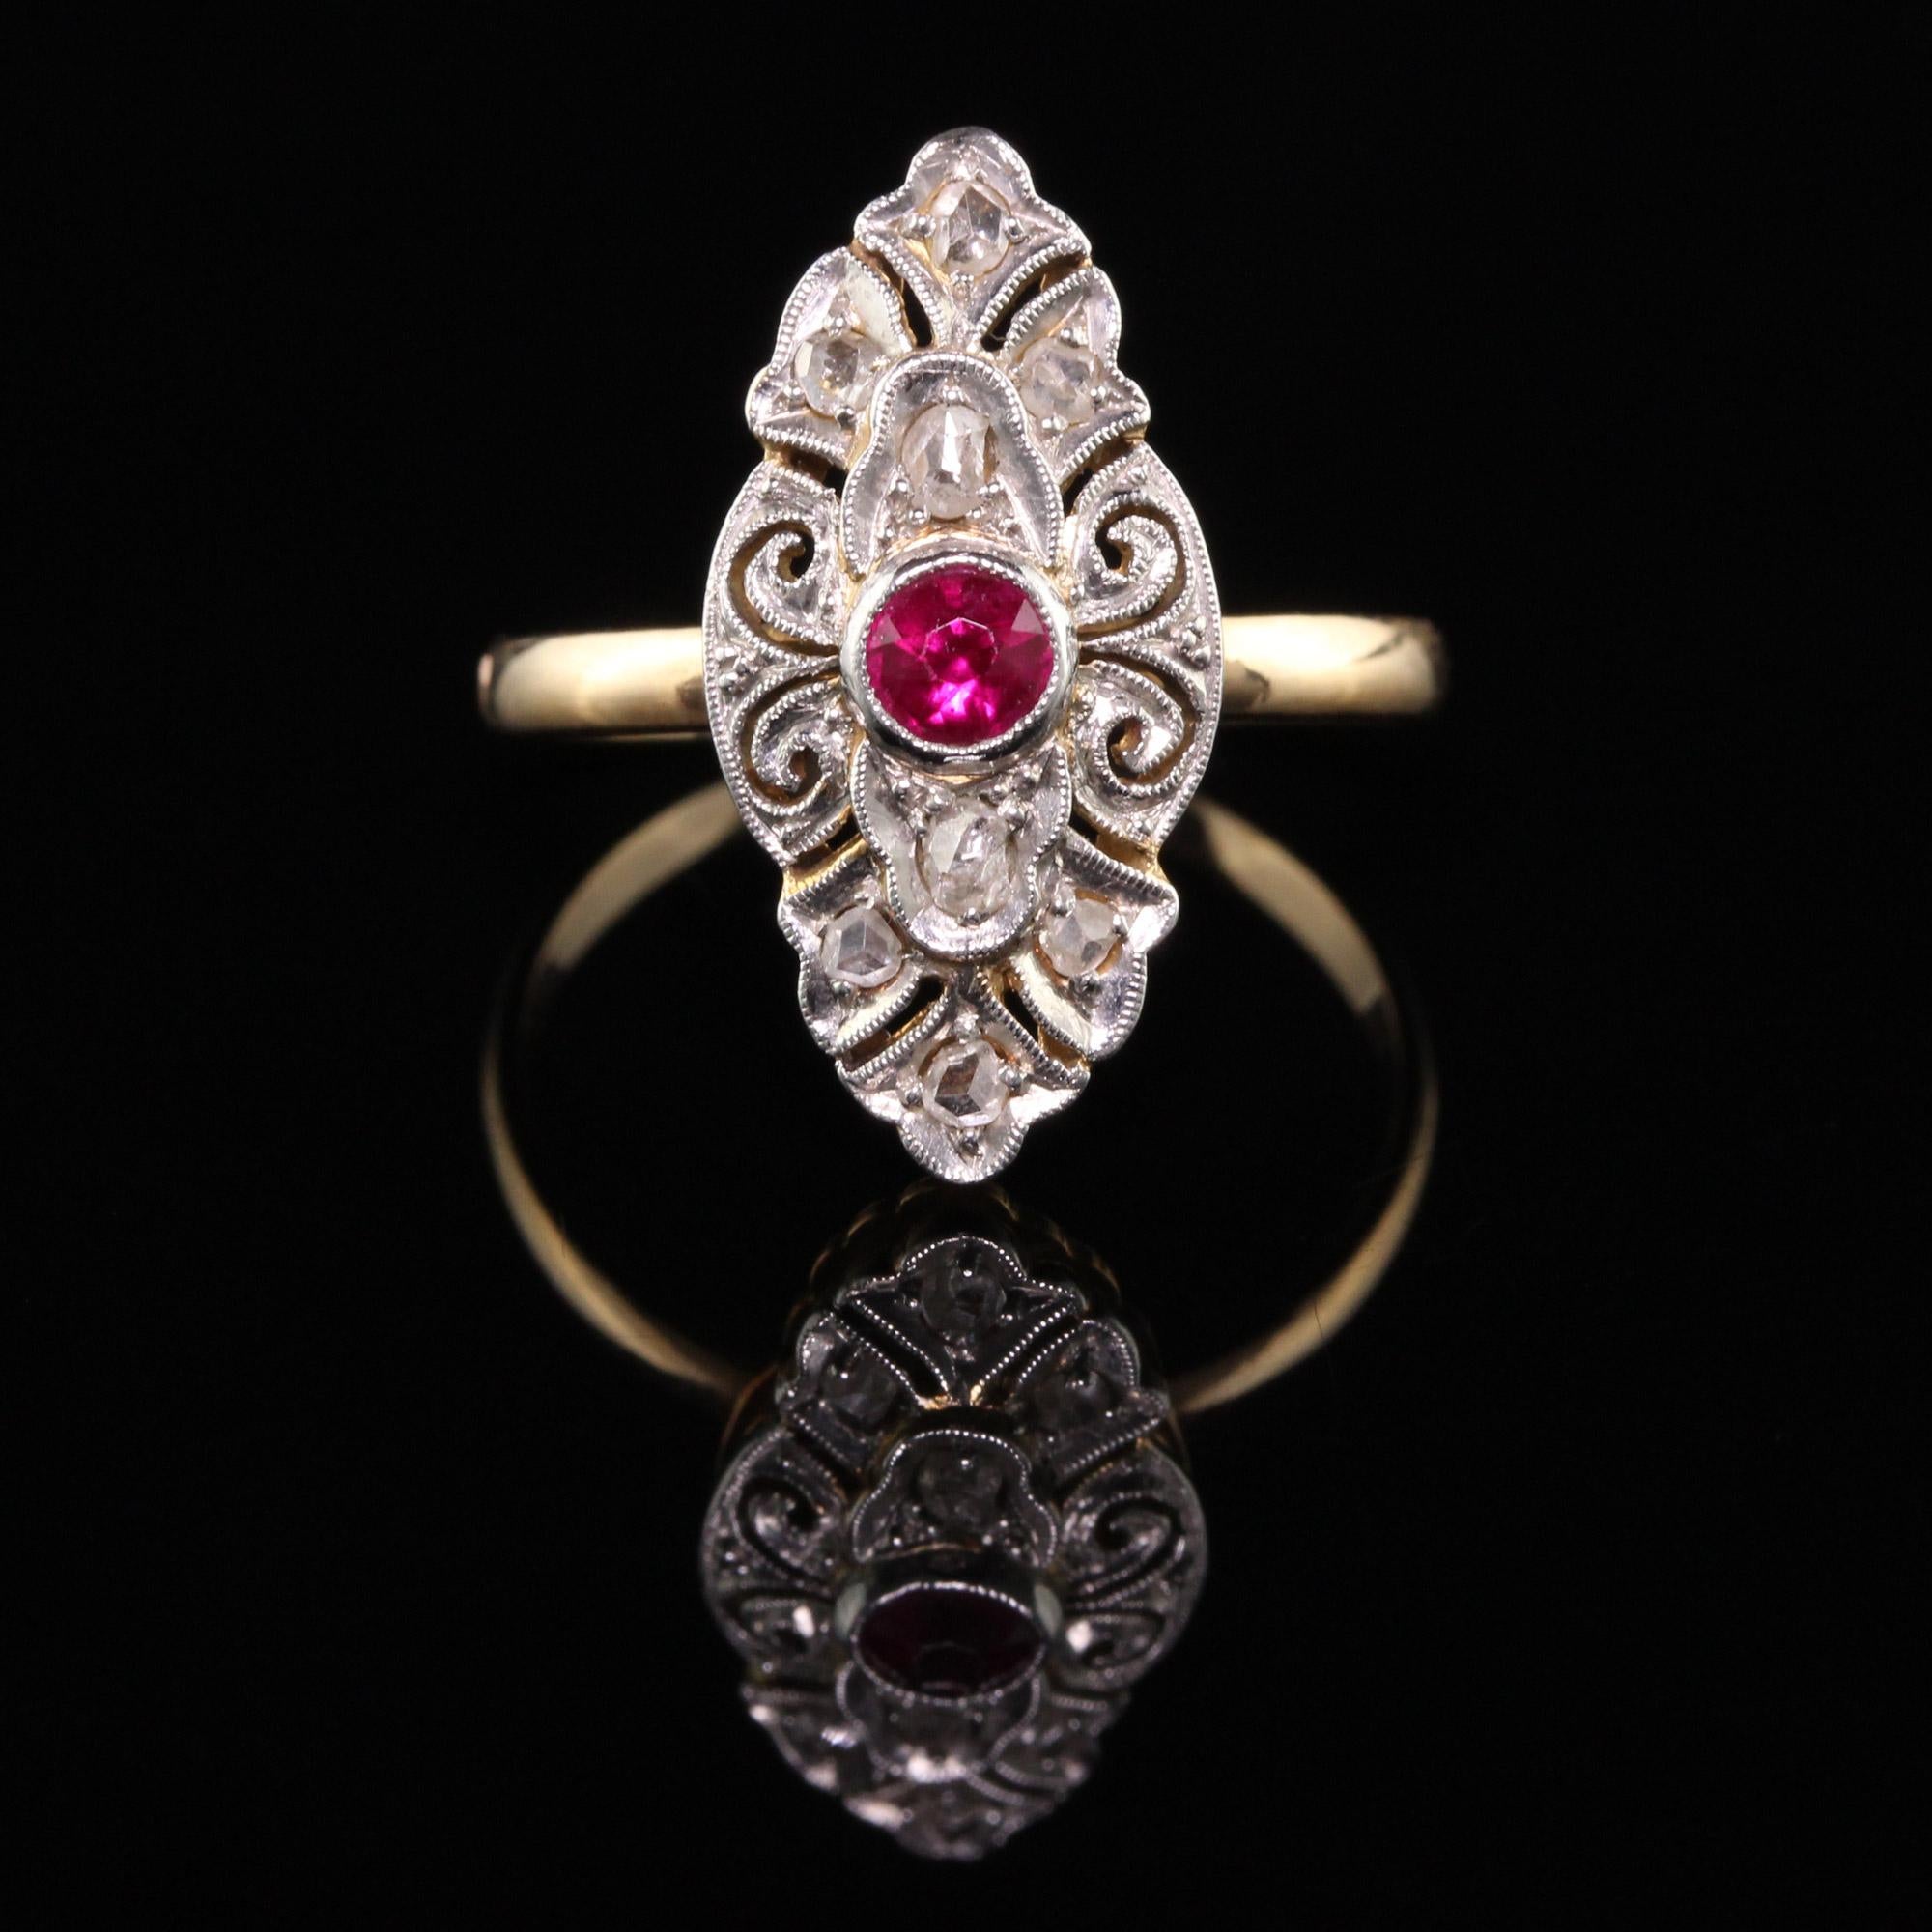 Antique Victorian 18k Yellow Gold Platinum Top Rose Cut Diamond and Ruby Ring In Good Condition For Sale In Great Neck, NY